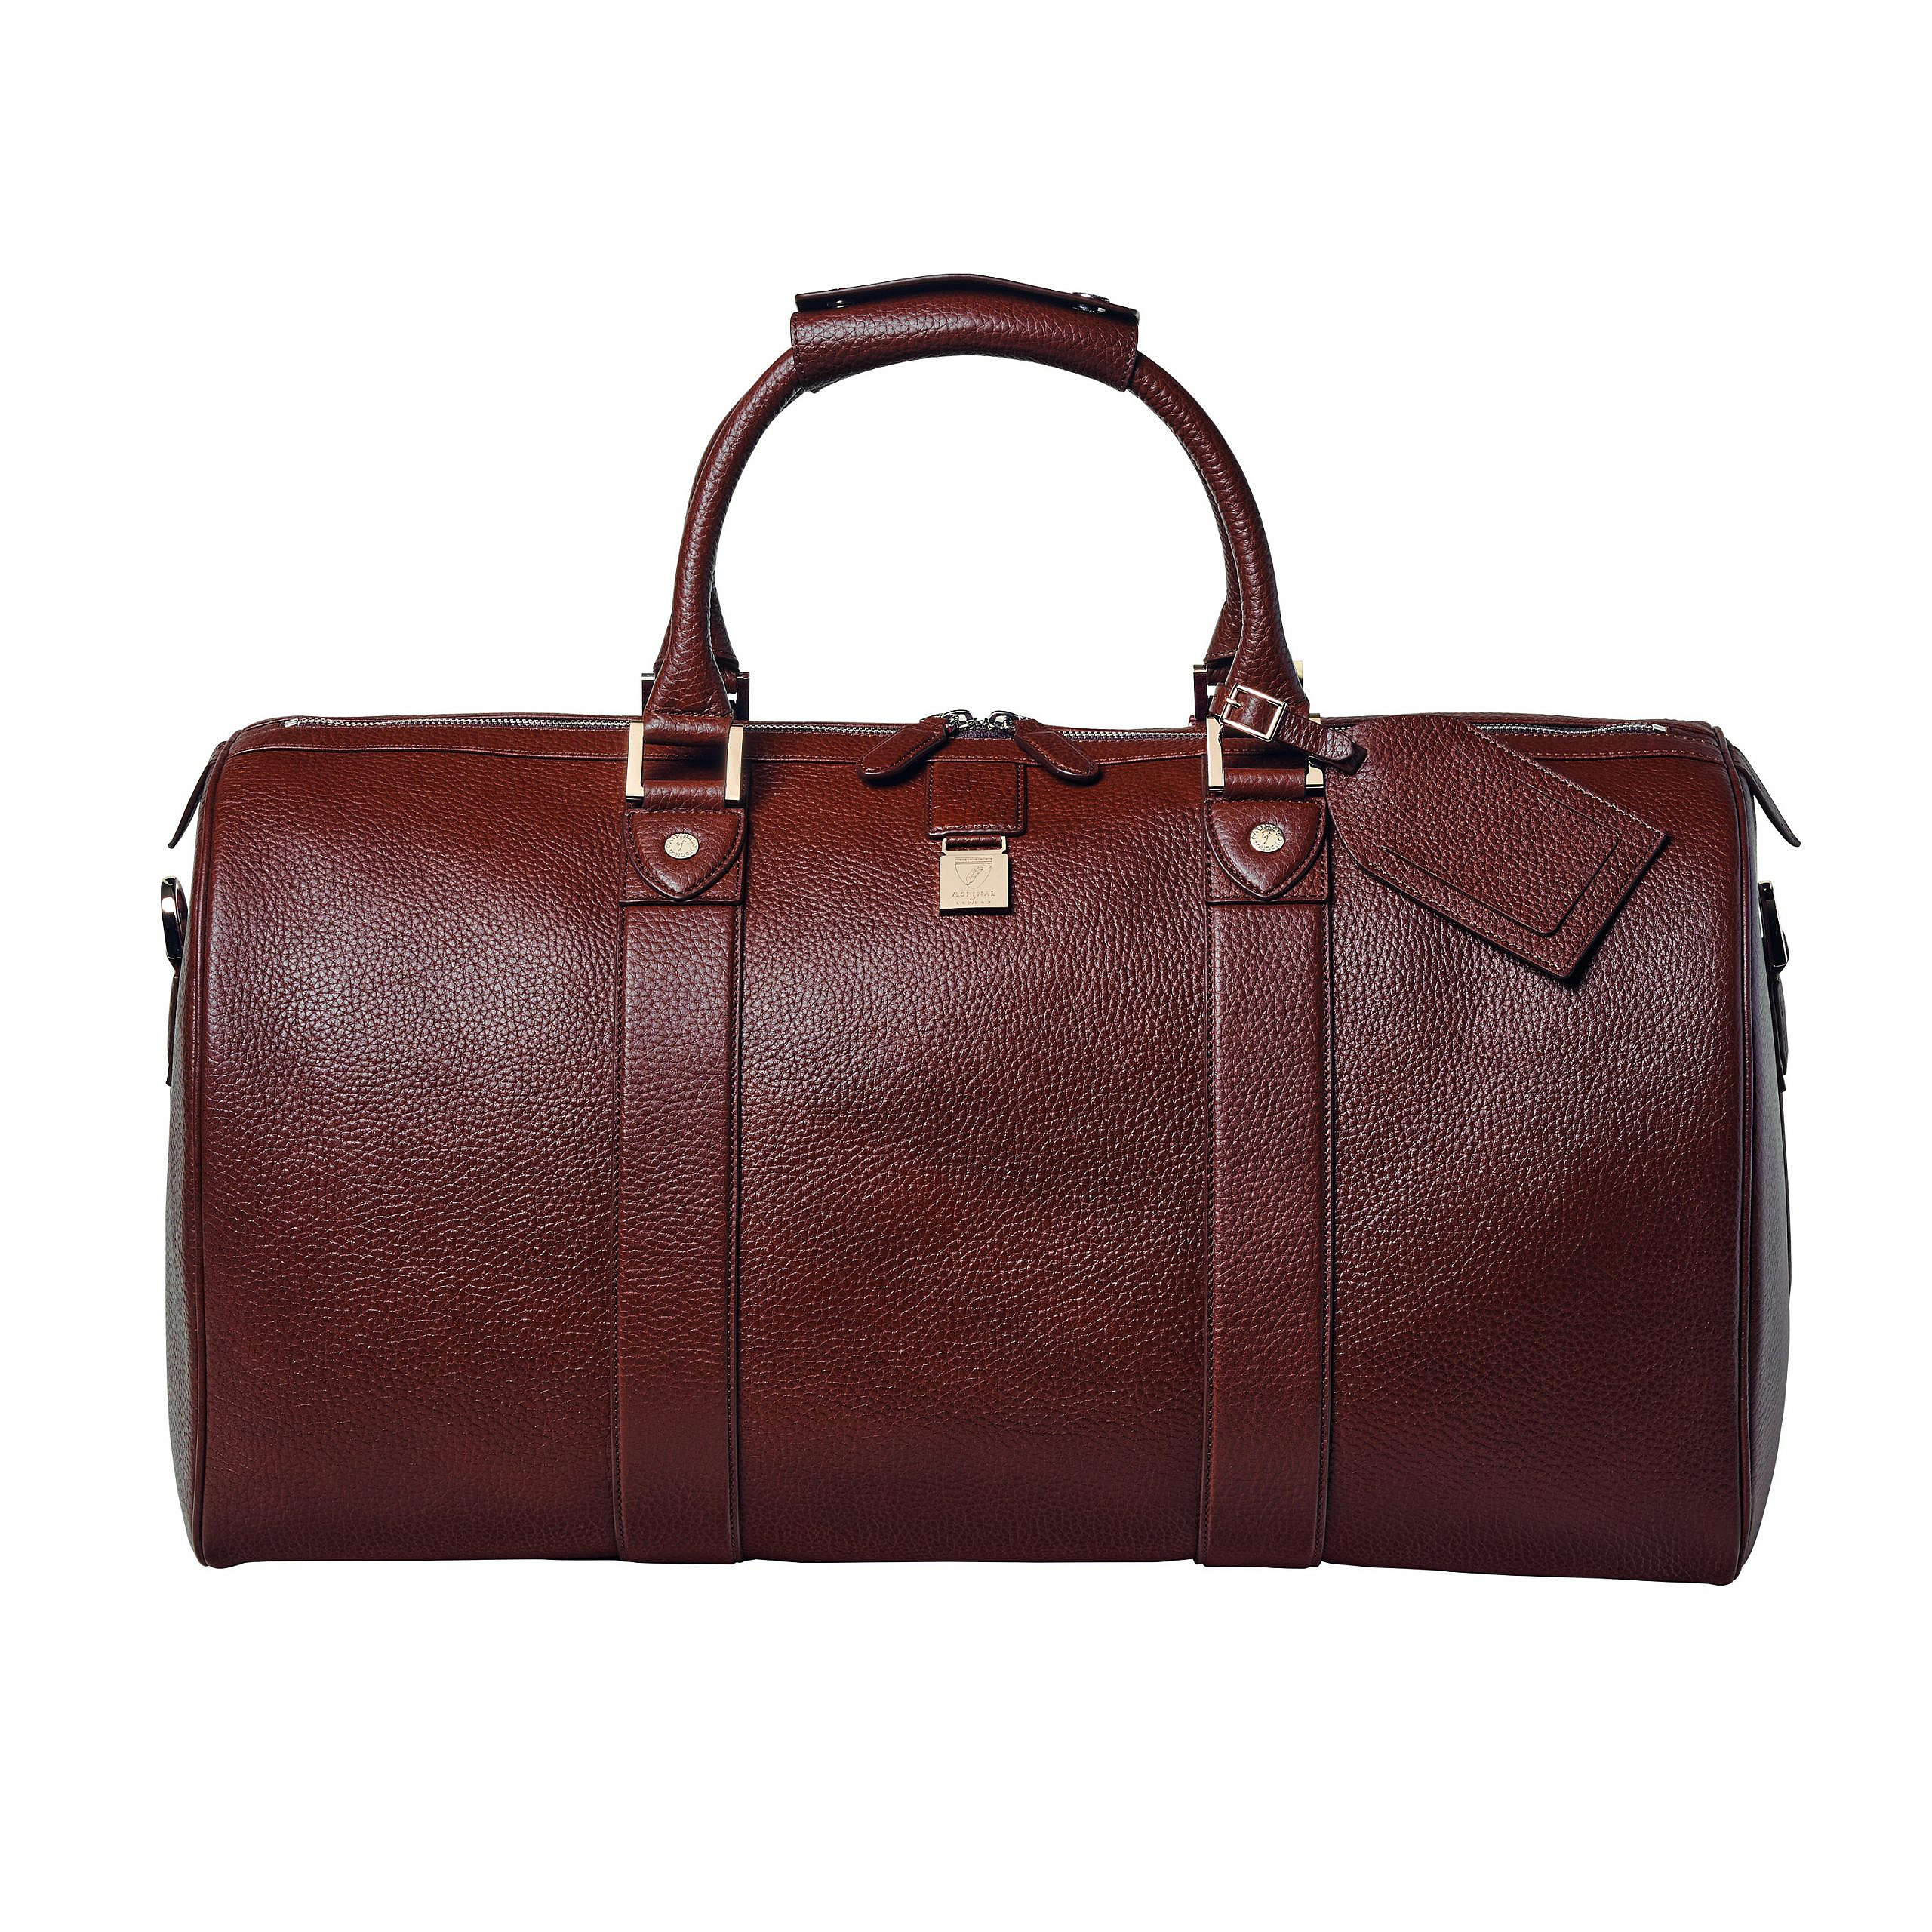 Spotlight on British Leather Brands with a positive international ...